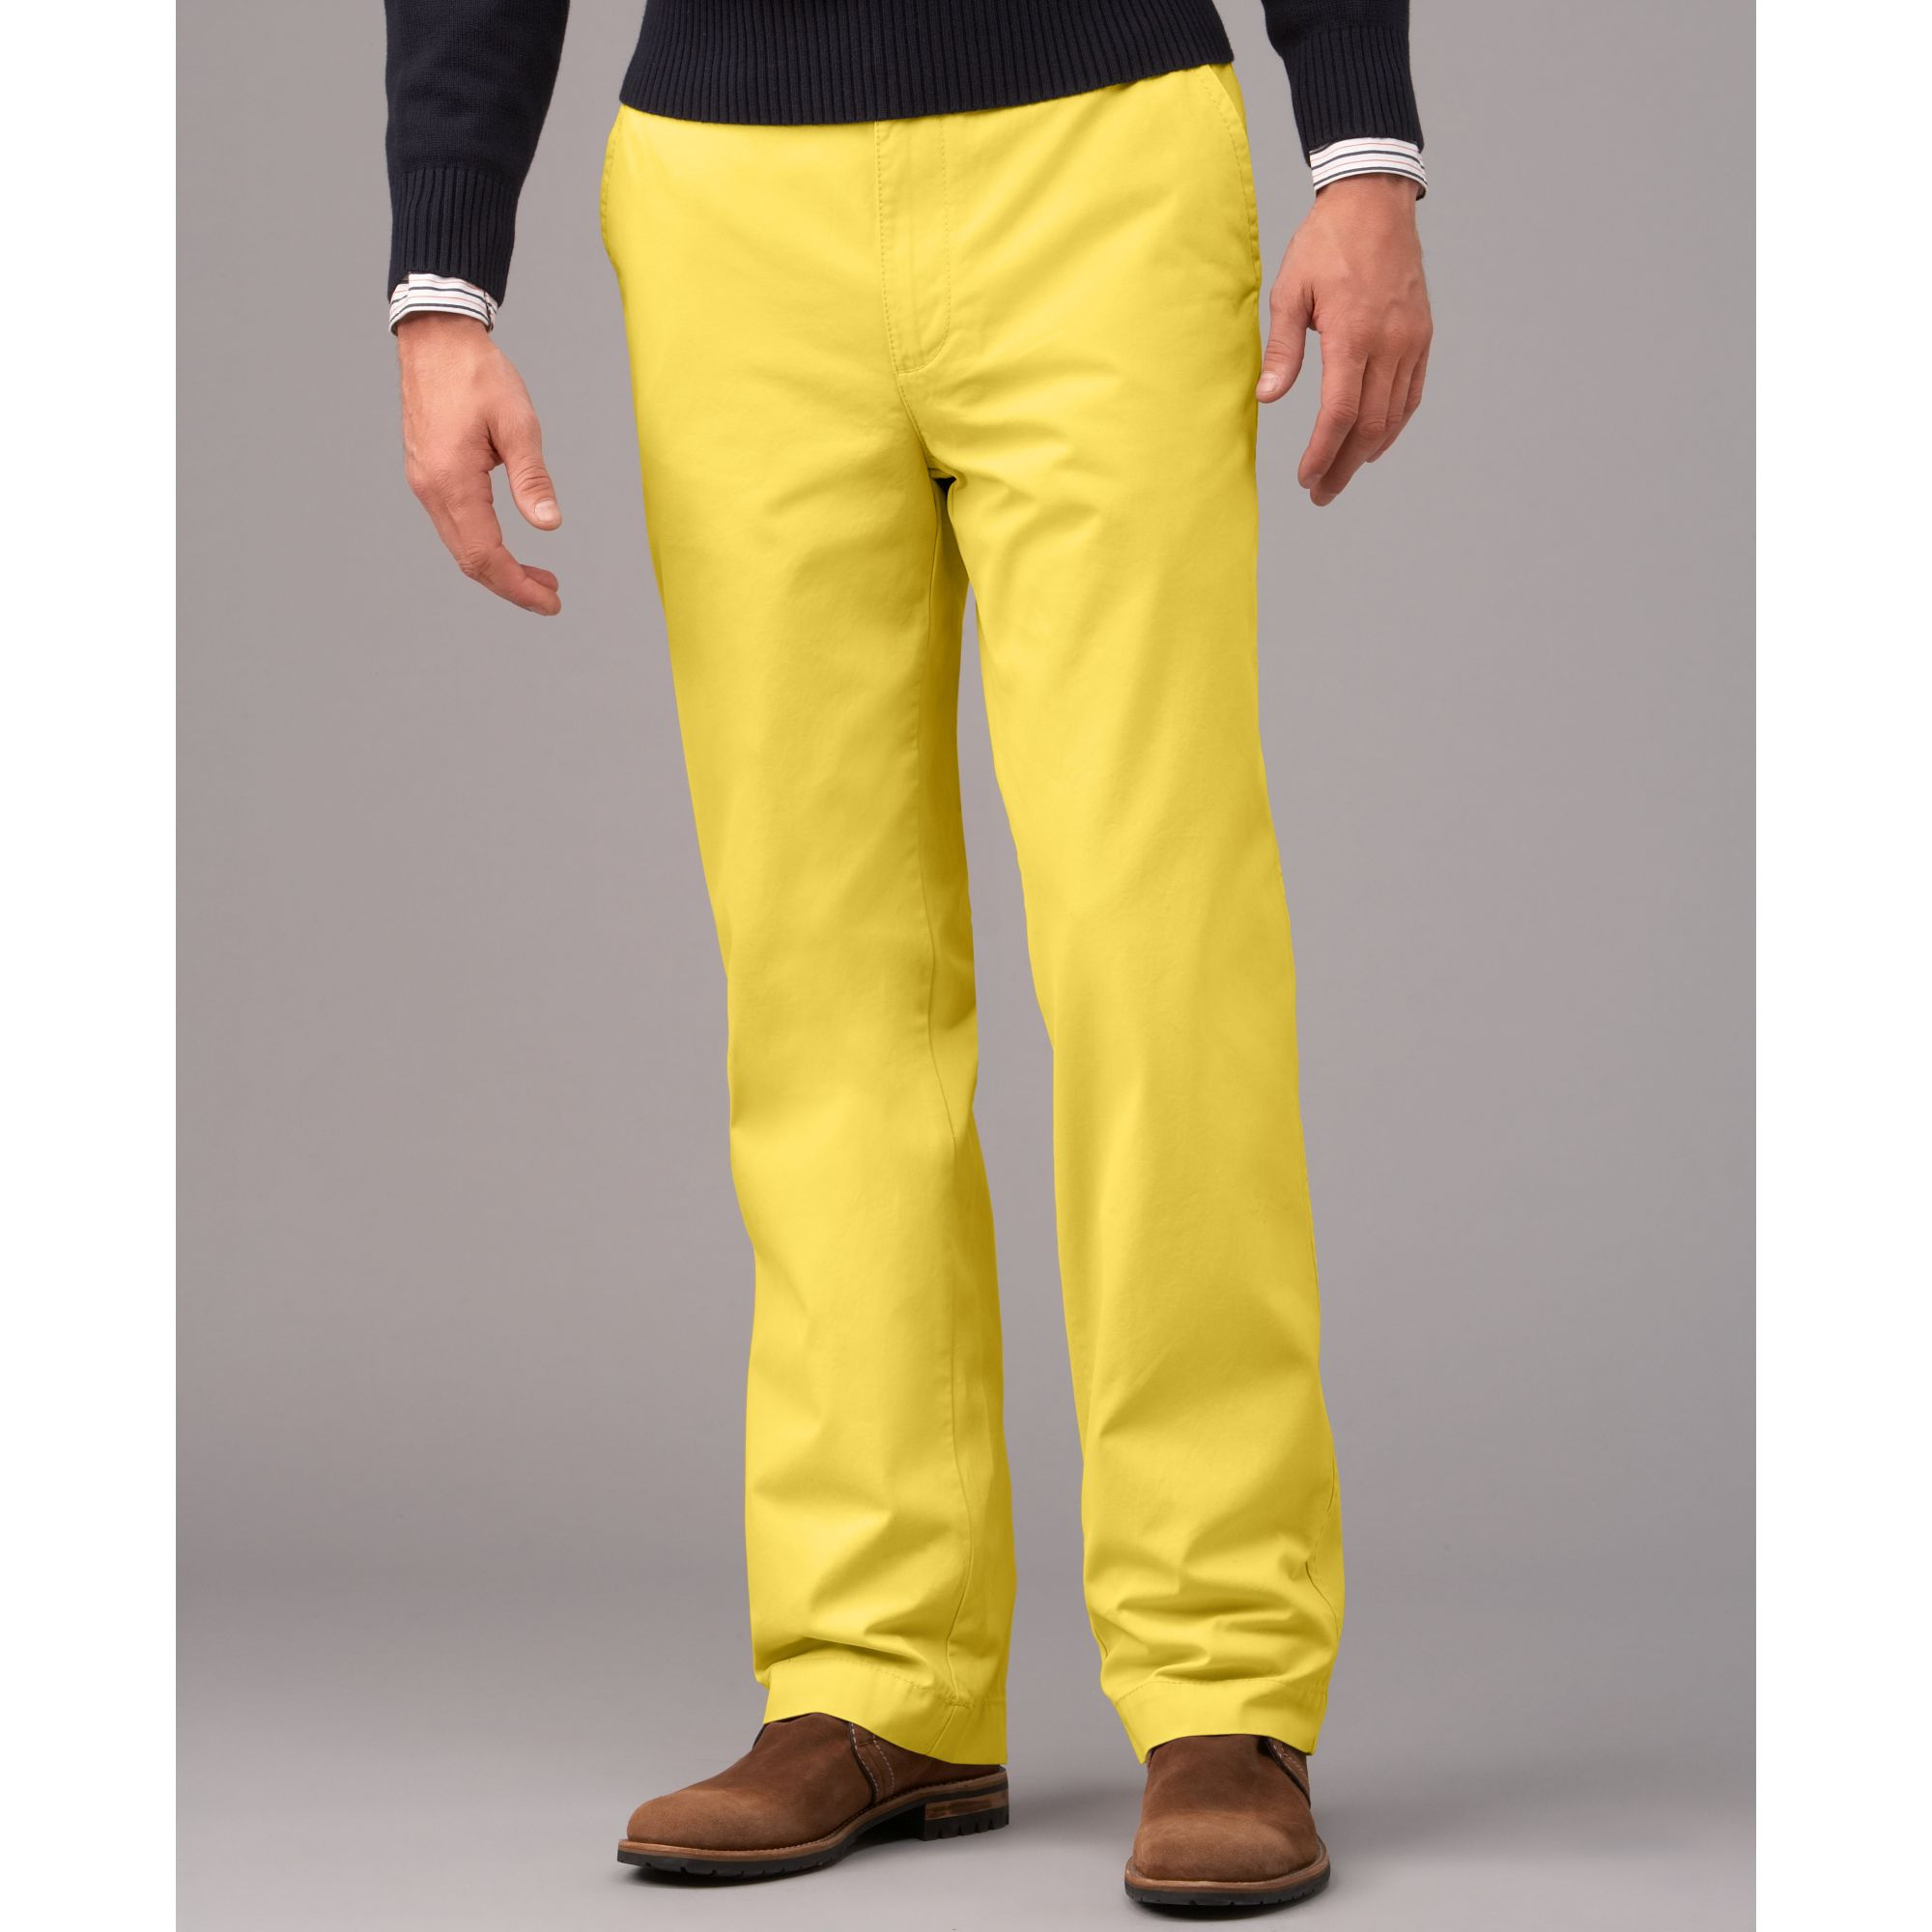 Tommy Hilfiger Mens Chinos Online Shopping Has Never Been As Easy